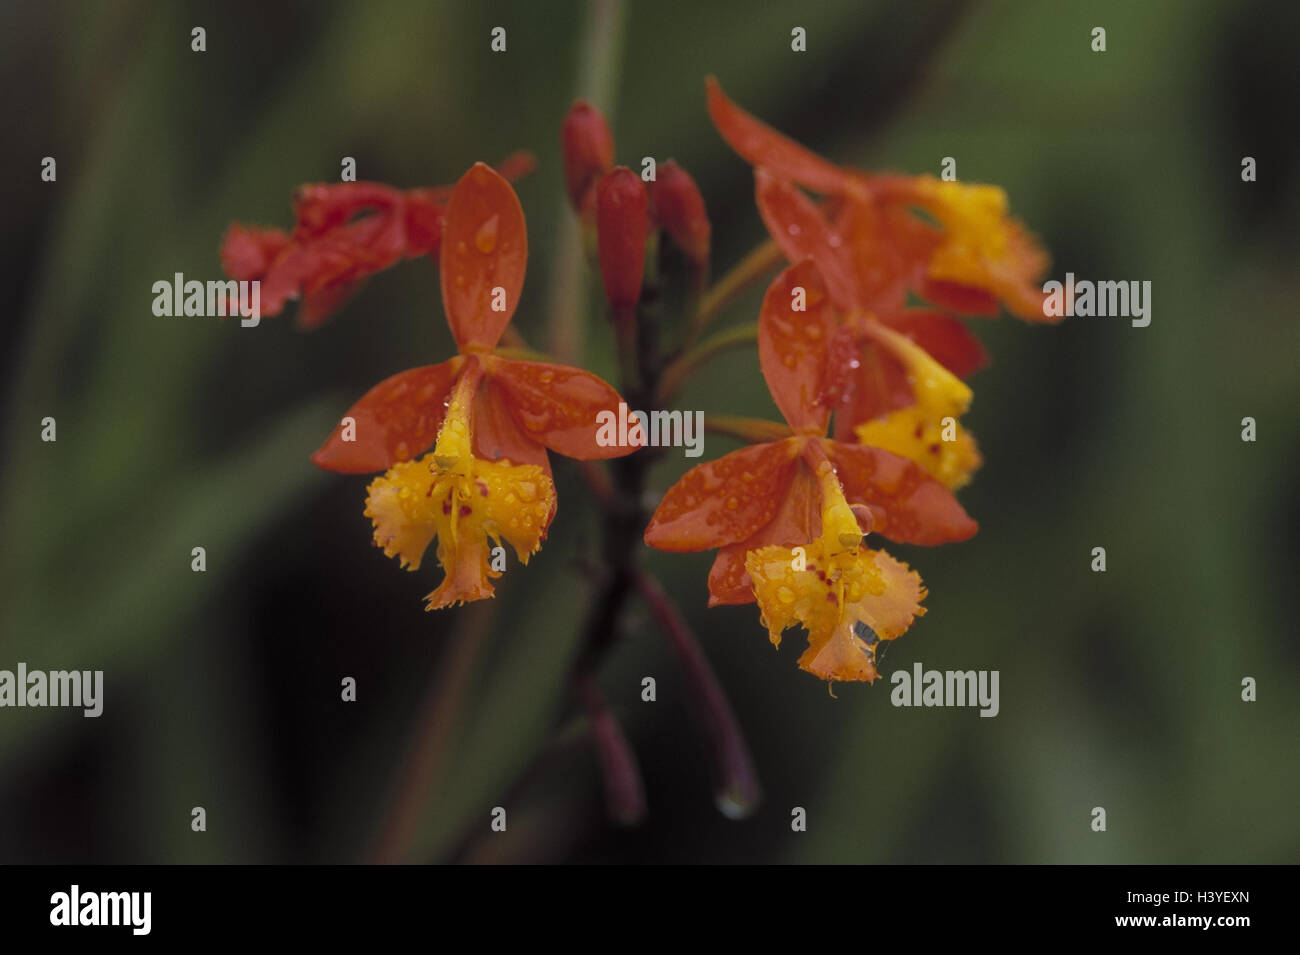 Epidendrum Ballerina Orchid High Resolution Stock Photography and Images -  Alamy